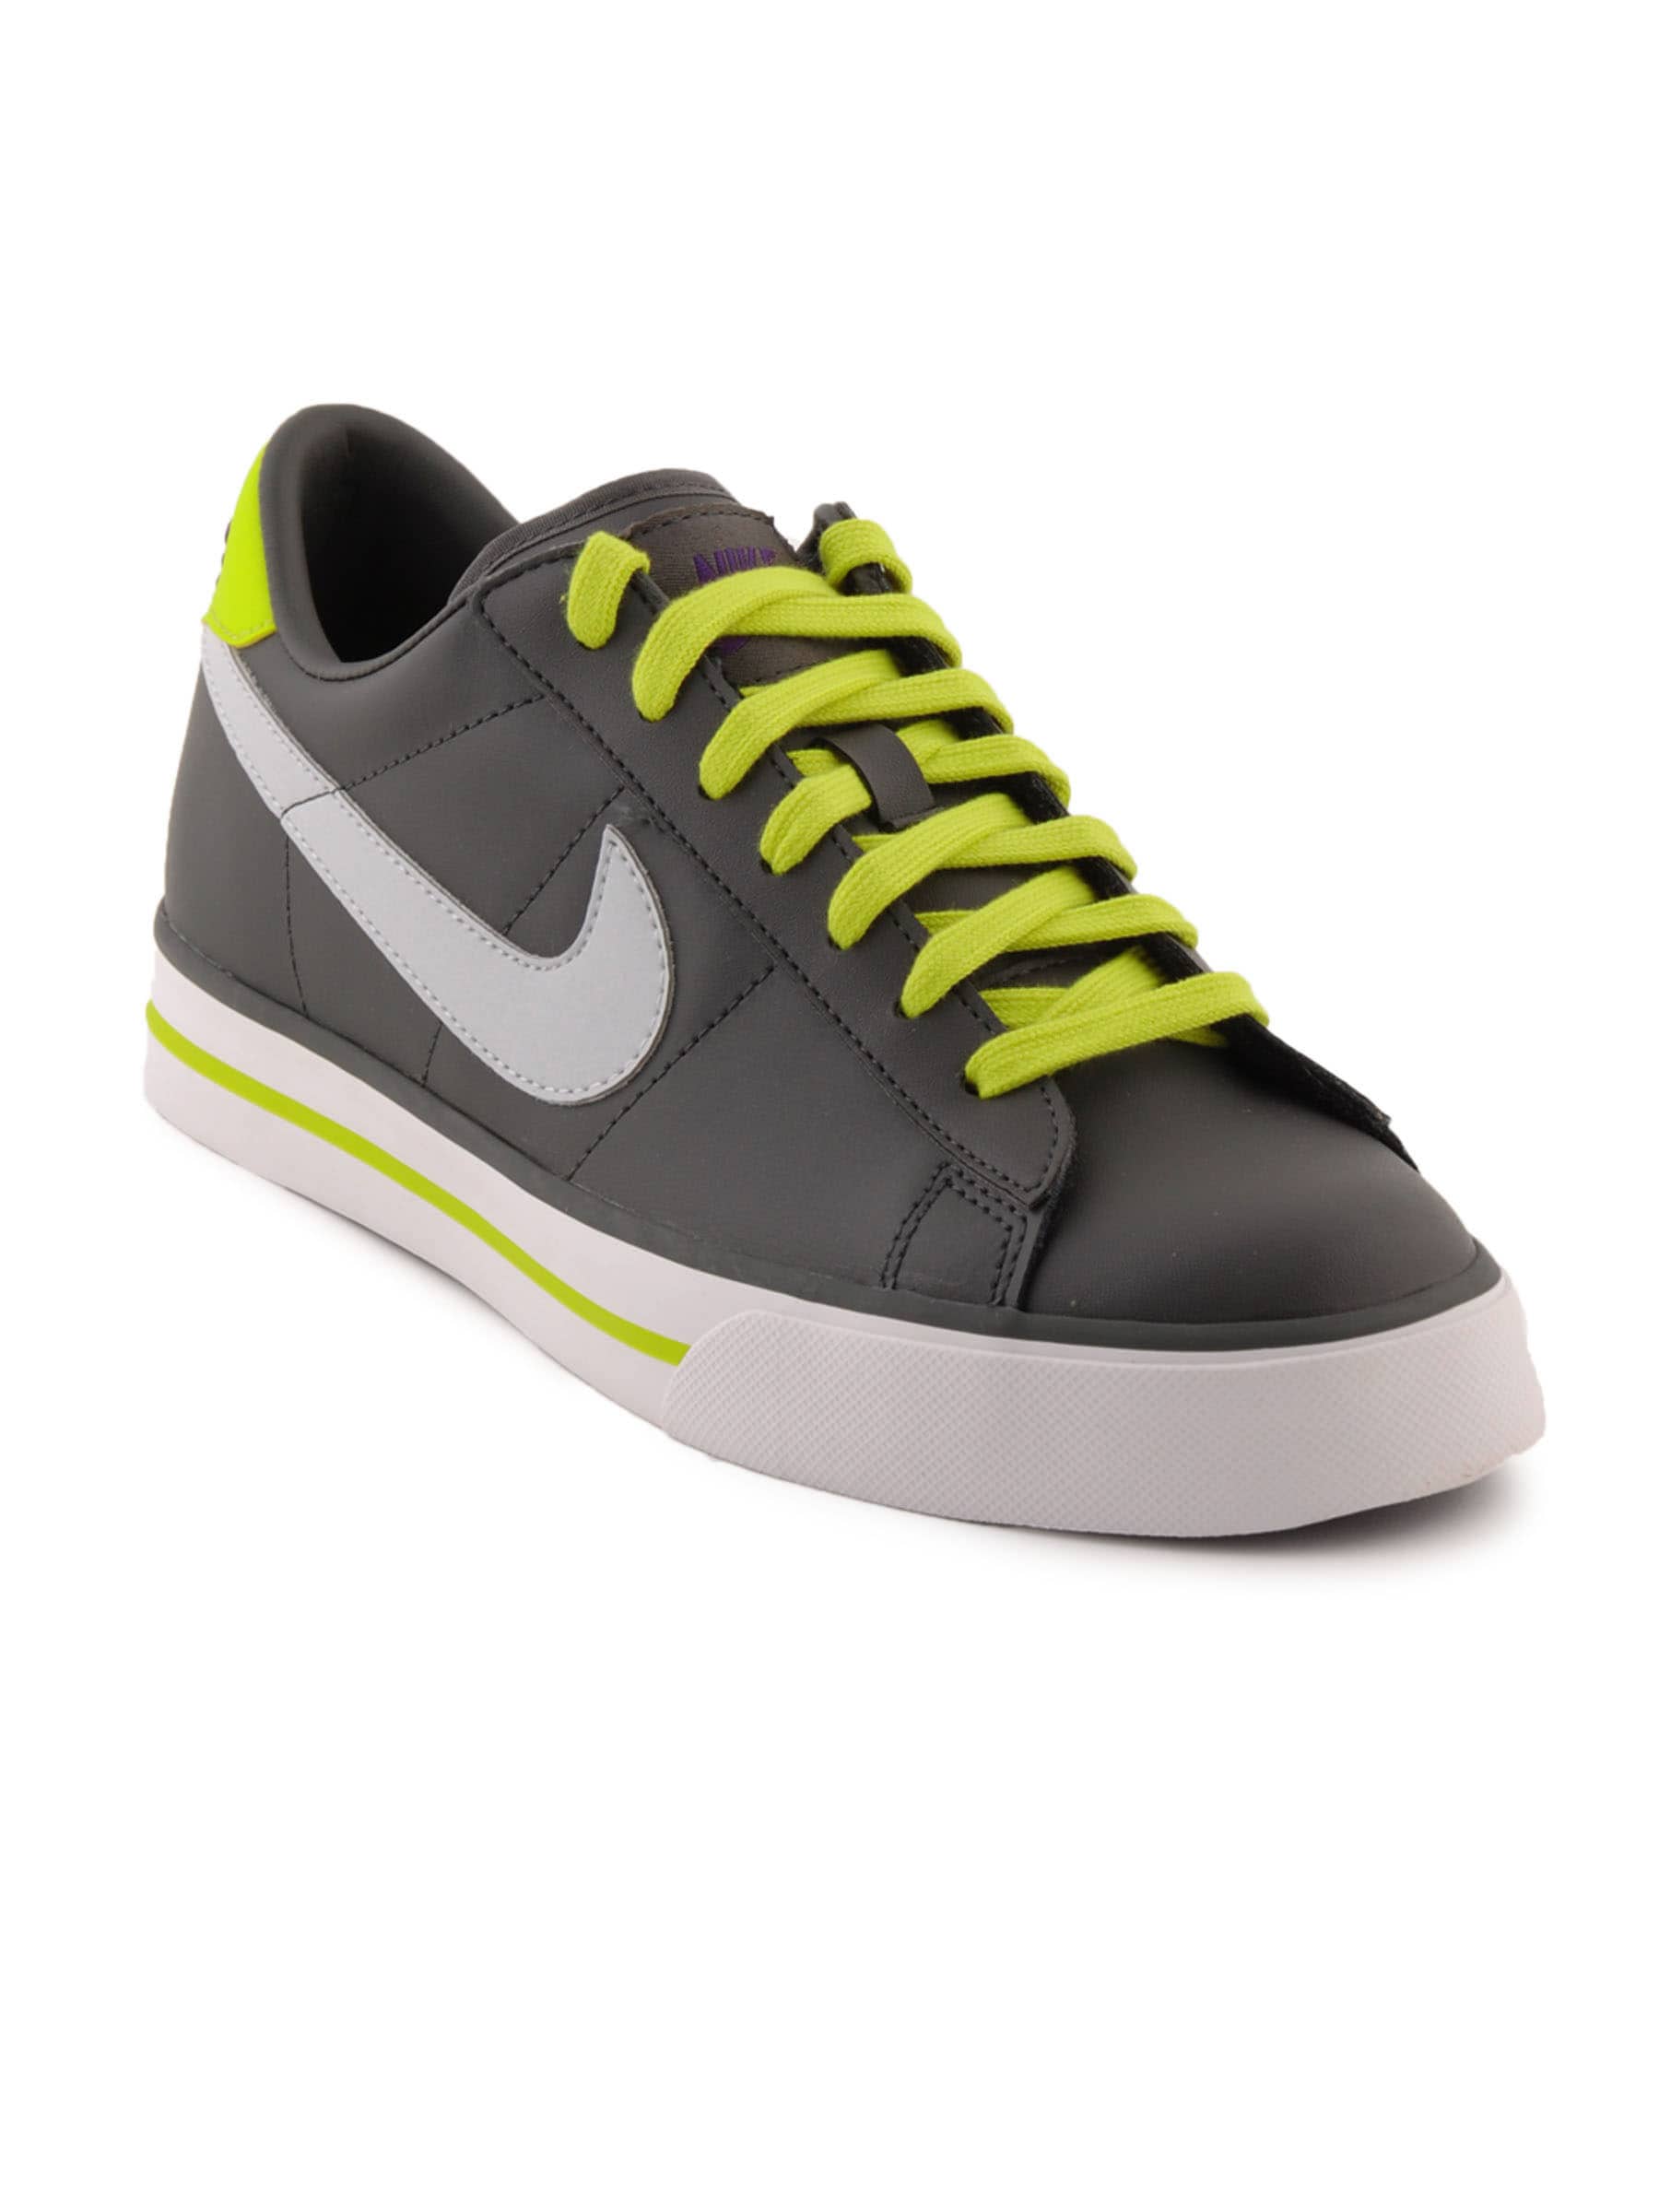 Nike Men Sweet Classic Leather Grey Casual Shoes